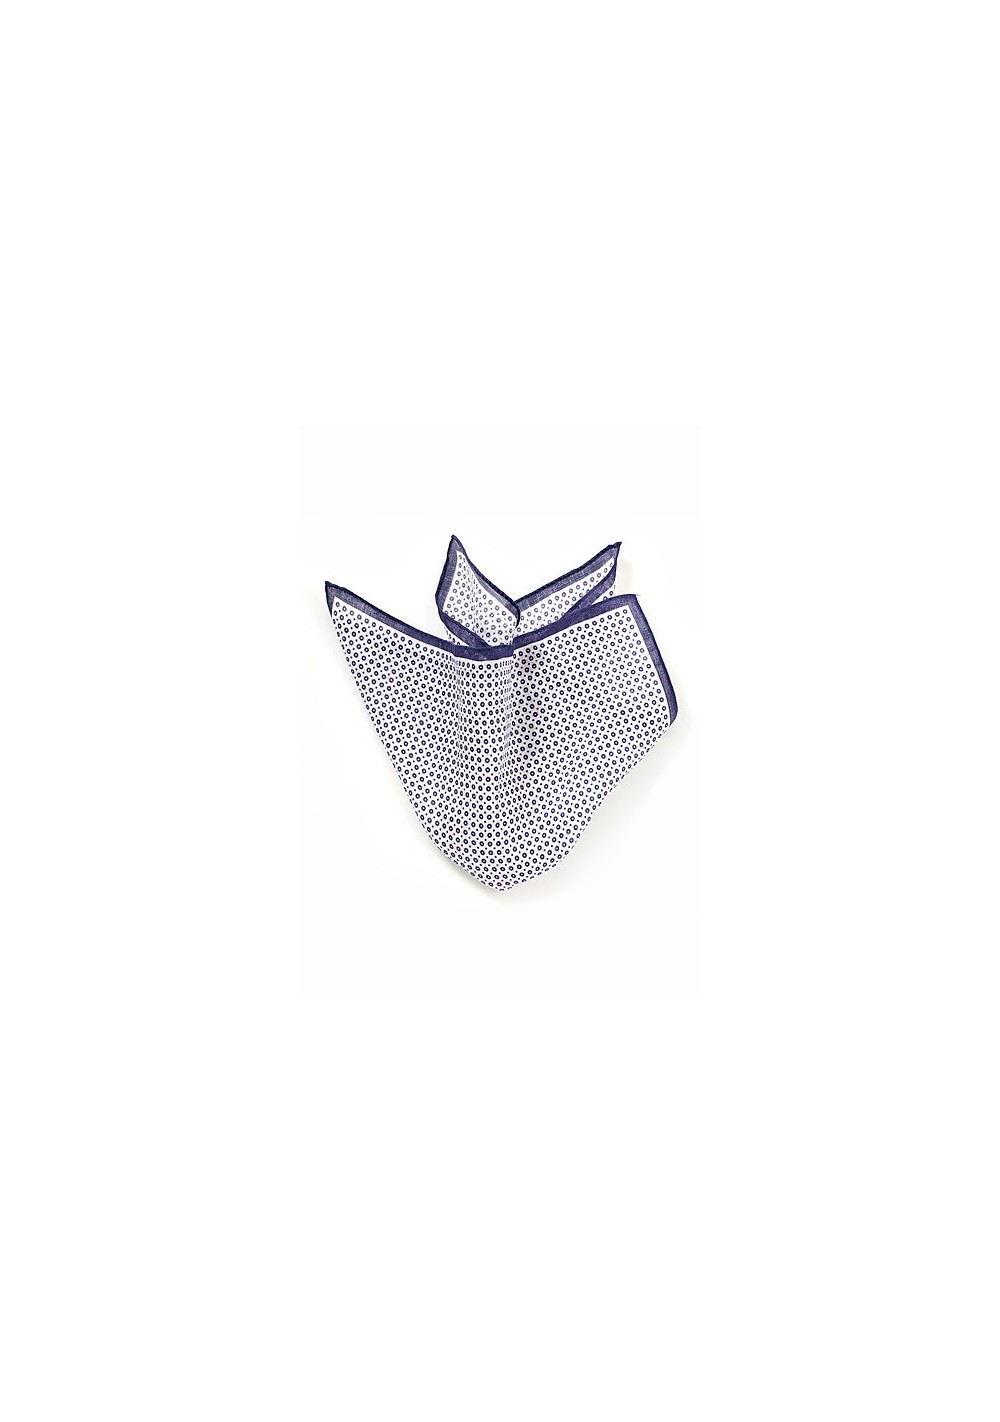 Linen Pocket Square in Blue and White